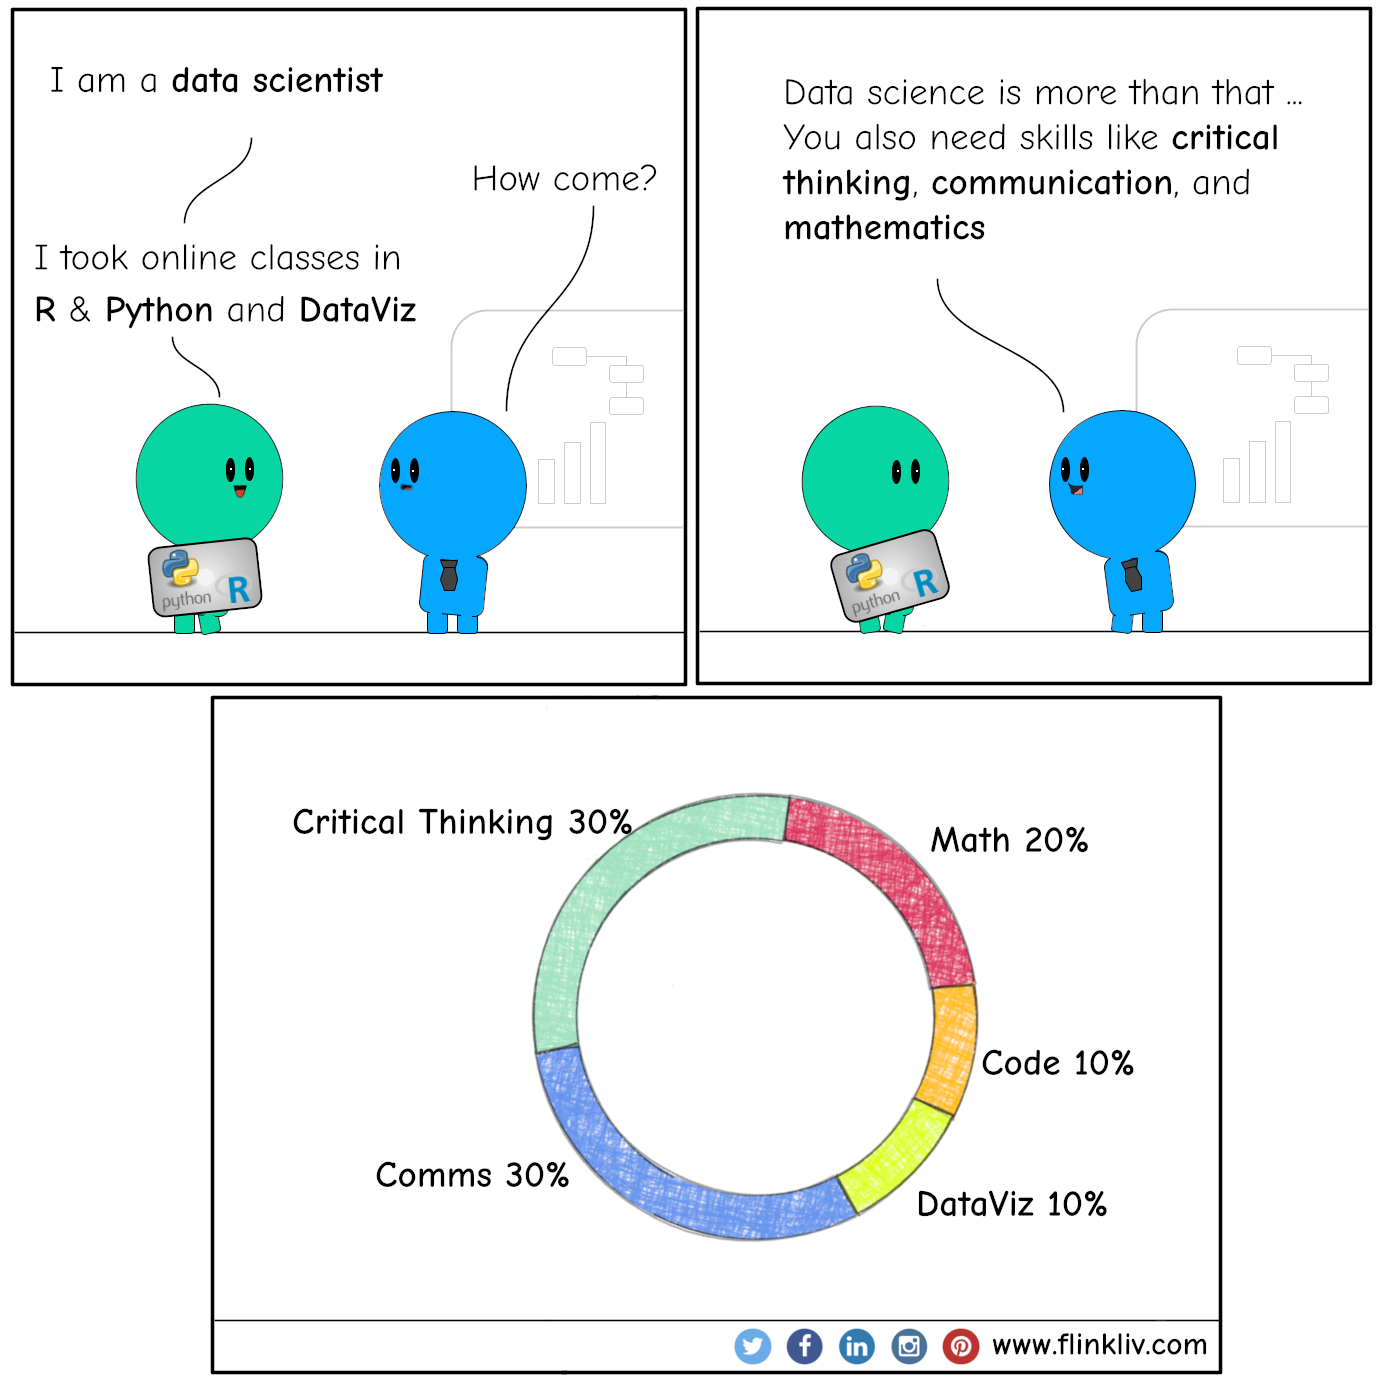 Conversation between A and B about Data scientist and critical thinking.
          A: I am a data scientist. 
          B: How come?
          A: I took online classes in R & Python and dataviz.
          
          
          B: Data science is more than that..
          B: You also need skills like critical thinking, communications, and mathematics. 
            
            